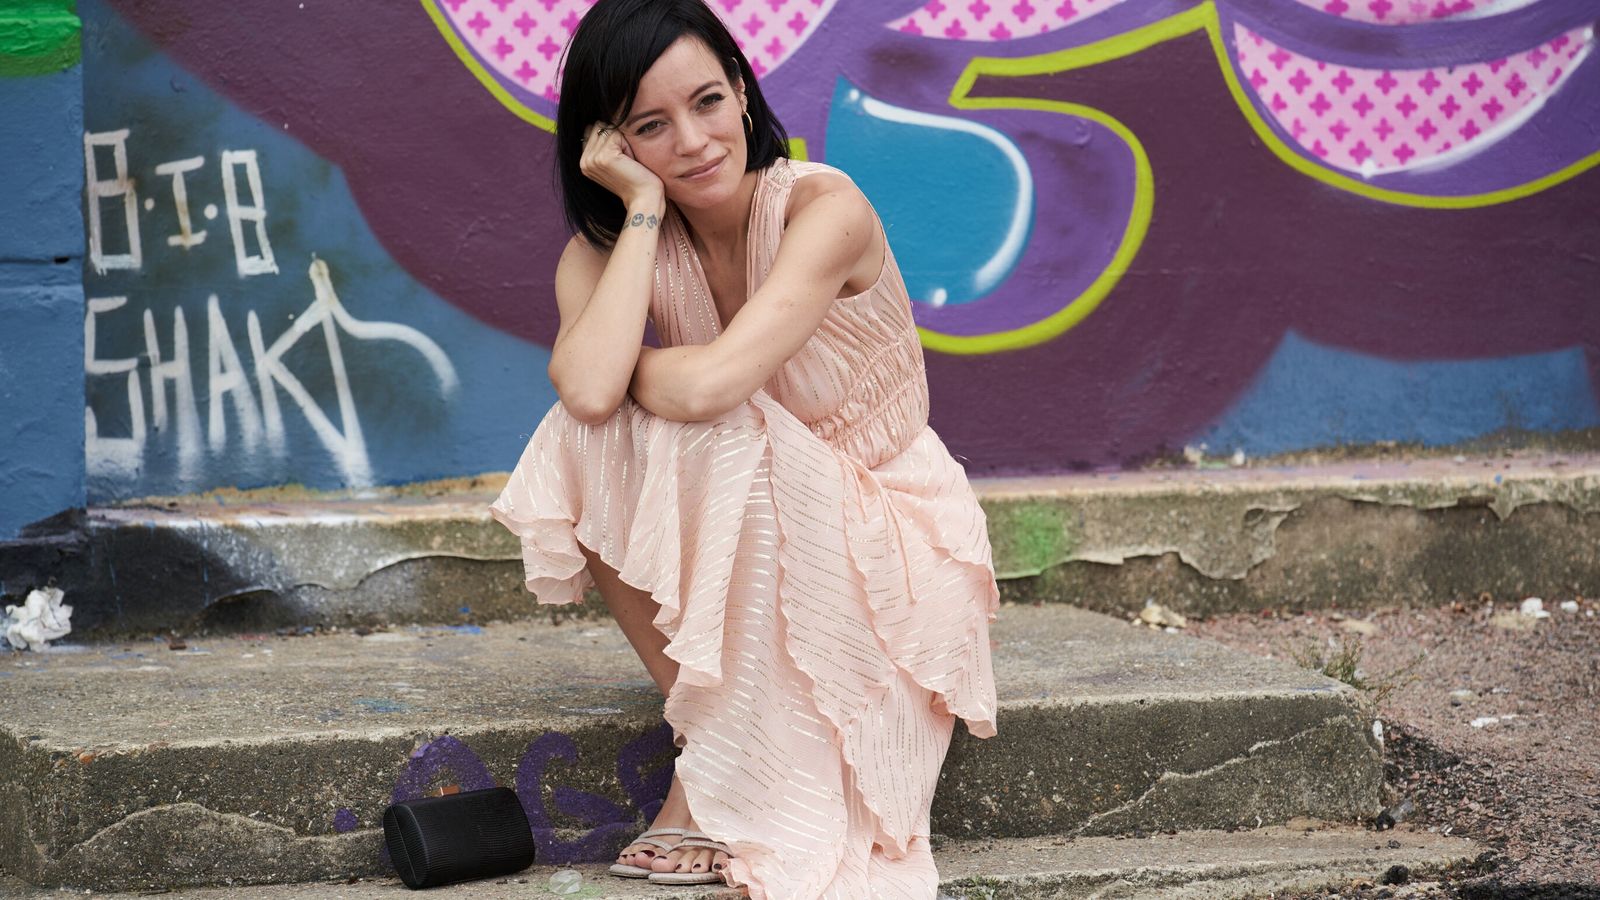 Lily Allen on moving from music to drama and her 'dysfunctional' family